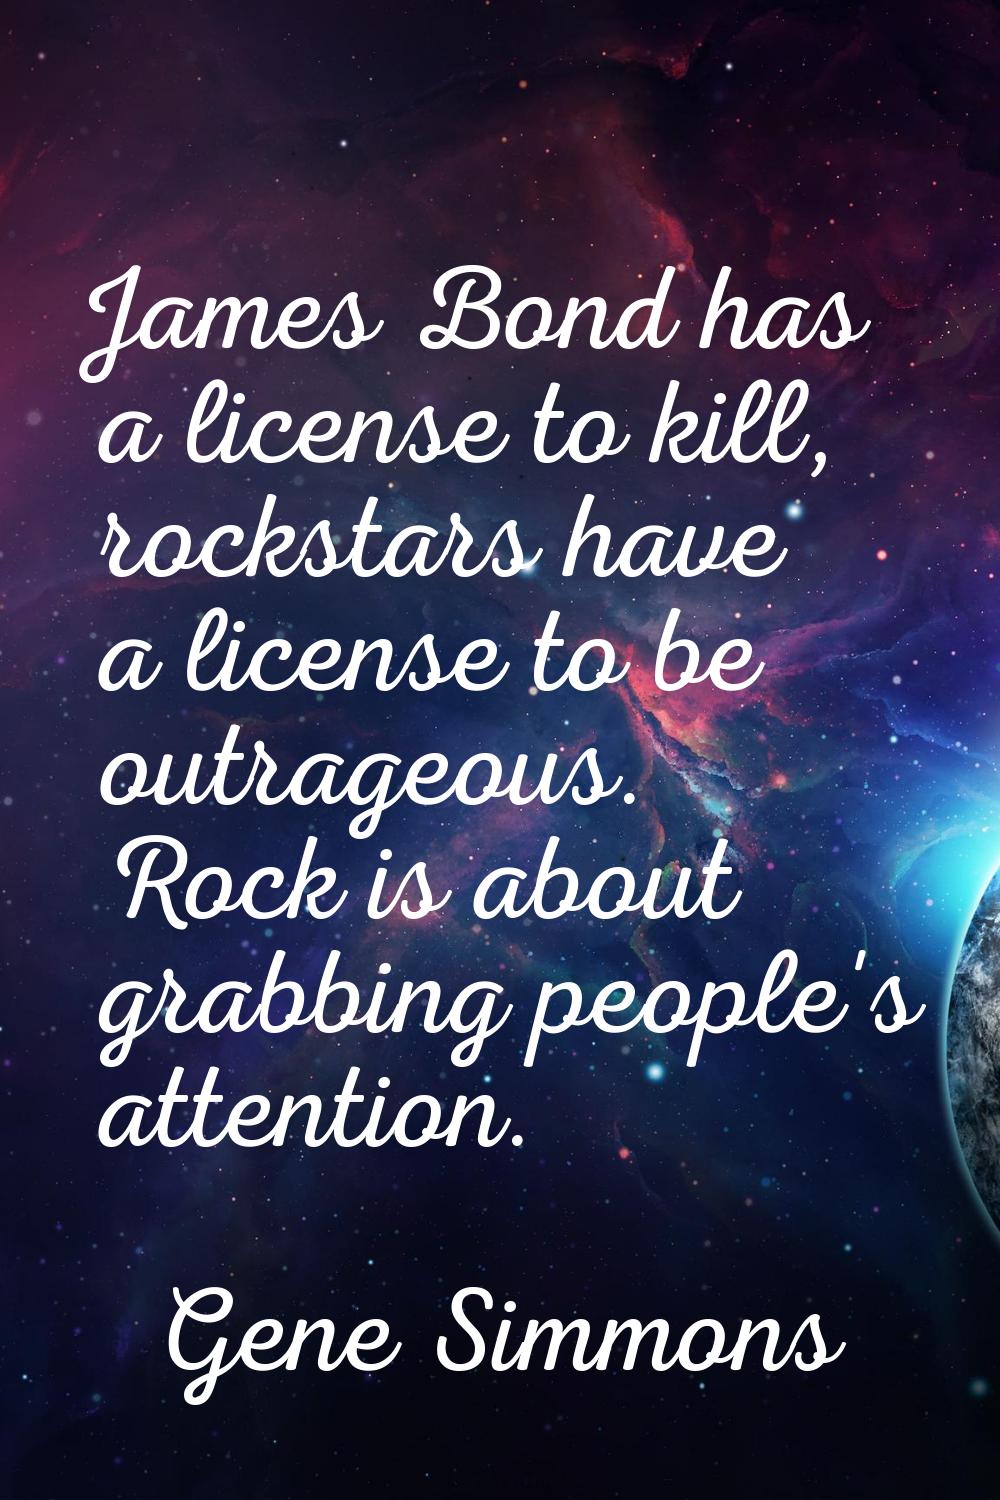 James Bond has a license to kill, rockstars have a license to be outrageous. Rock is about grabbing